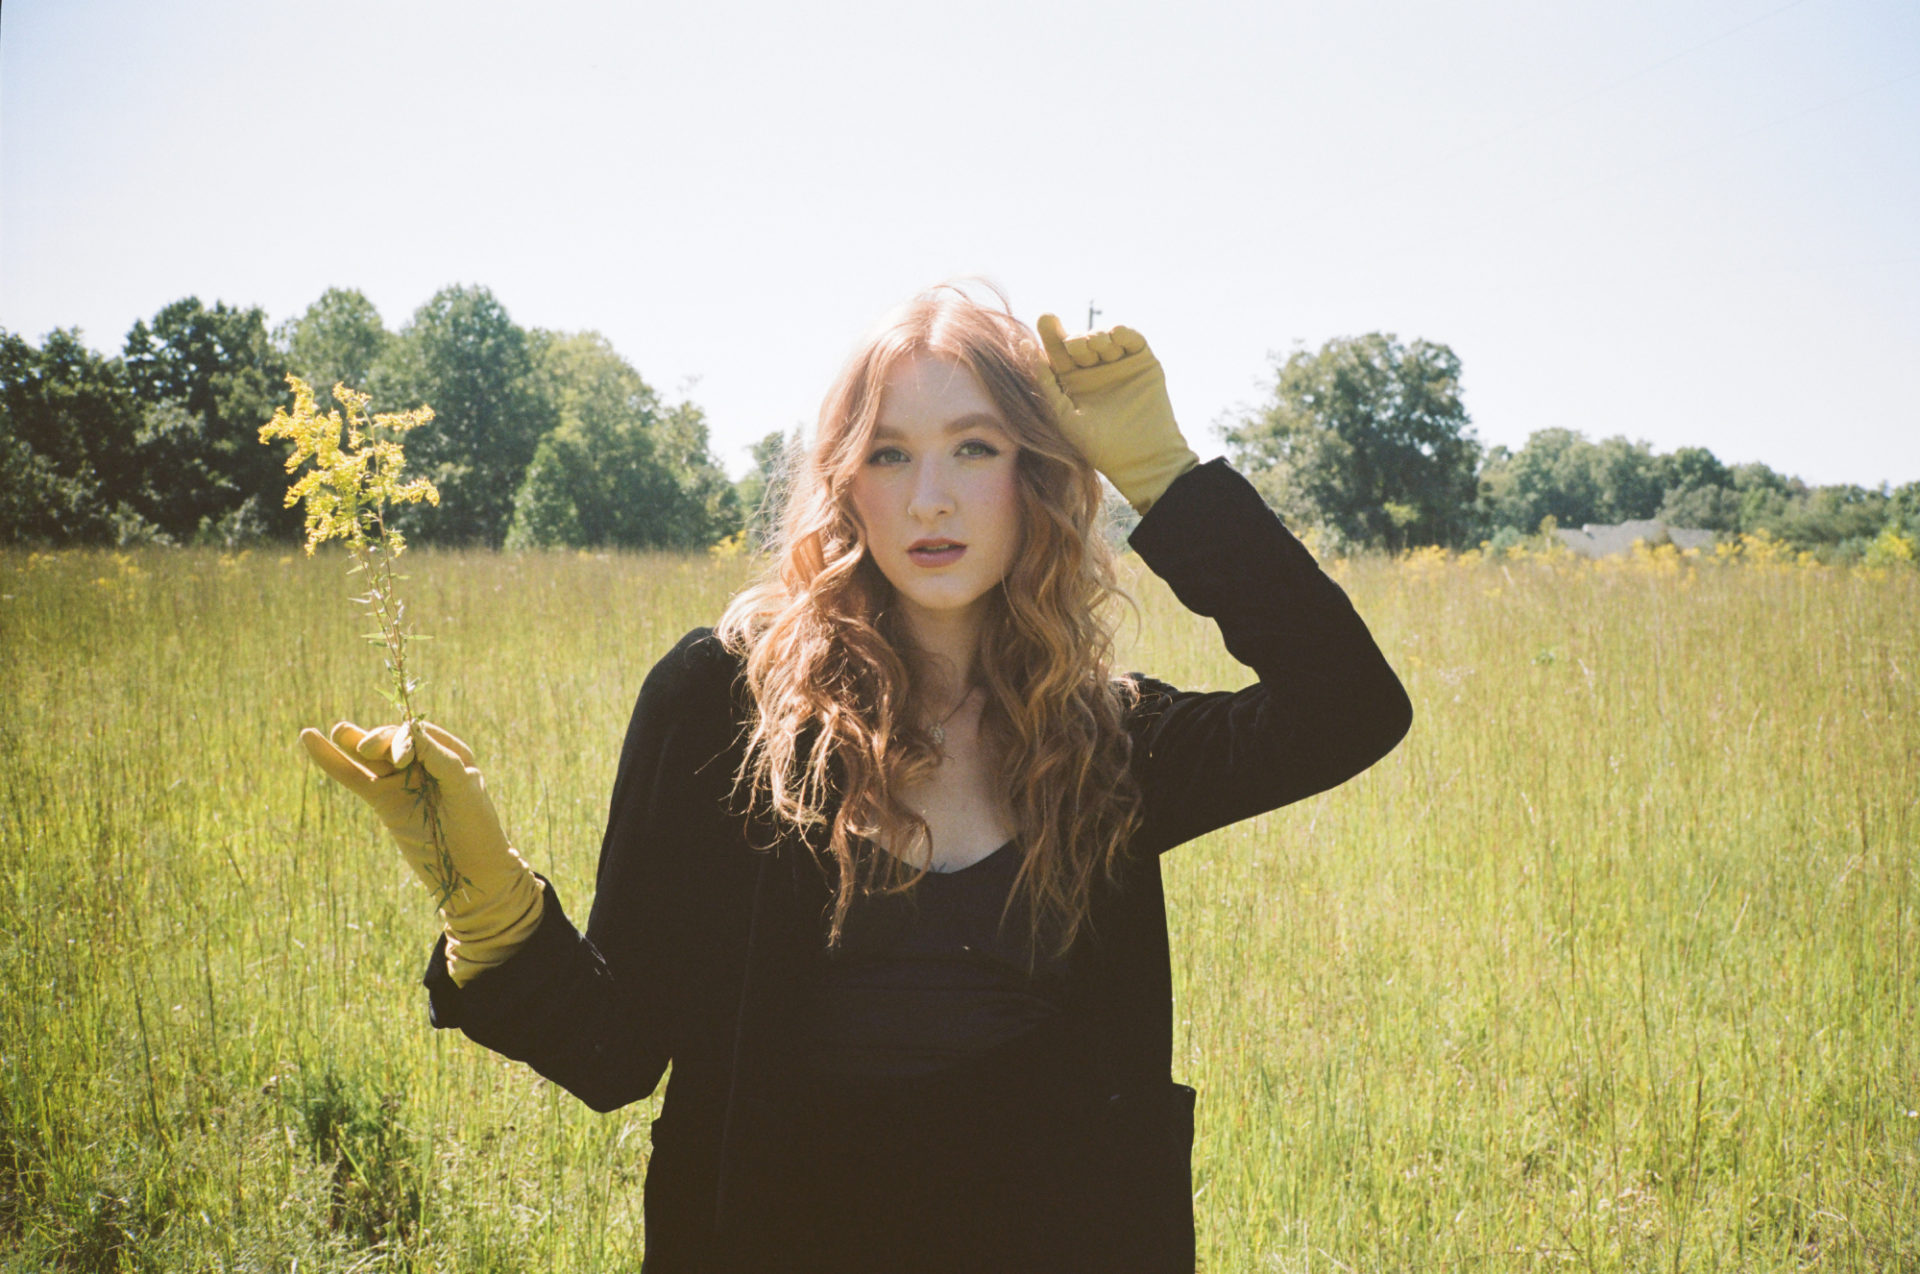 Photo of Bella White. A thin, white woman with long, wavy reddish hair is standing in a field of tall grass. She is wearing all black, including a black jacket, and chartreuse gloves that match the color of the grass behind her. Her left arm is raised to the side of her head and he rright arm holds a yellow flower. Photo by Bree Fish.